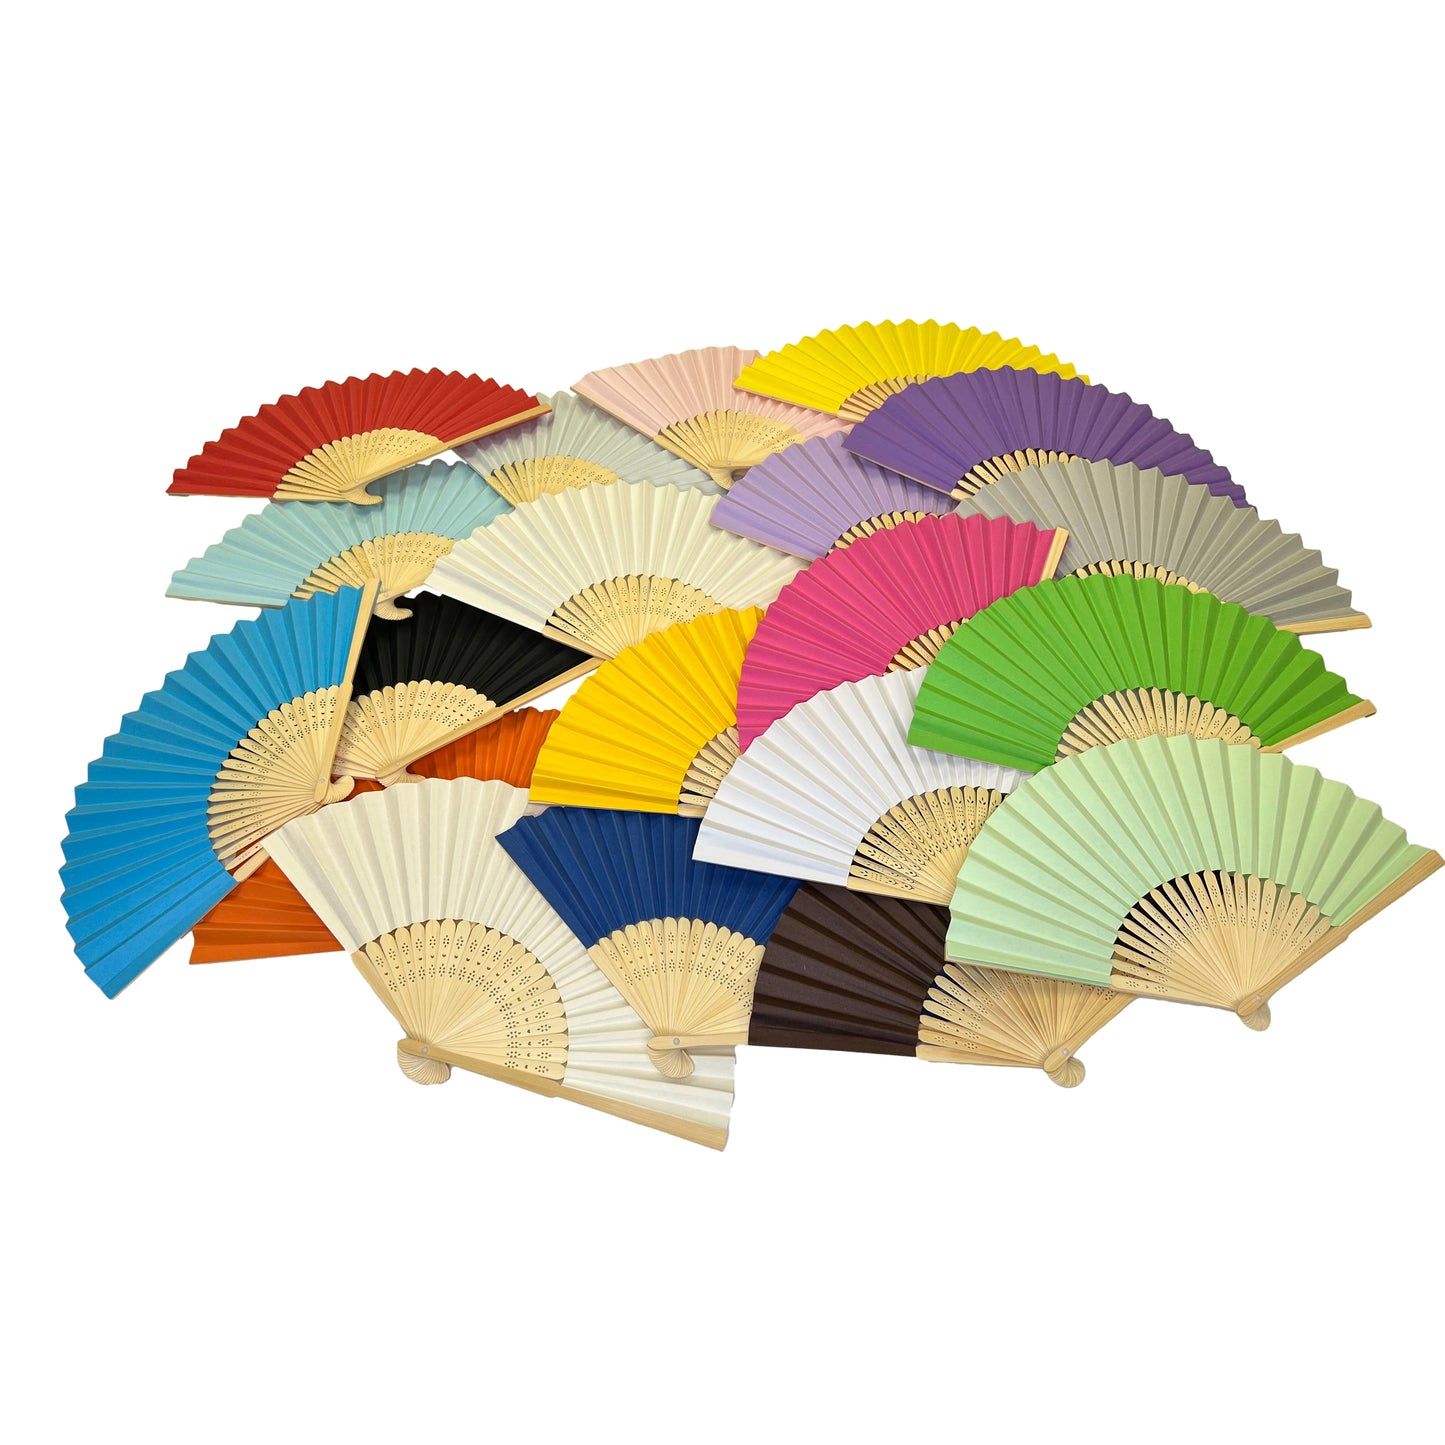 Pack of 500 Dark Pink Paper Foldable Hand Held Bamboo Wooden Fans by Parev